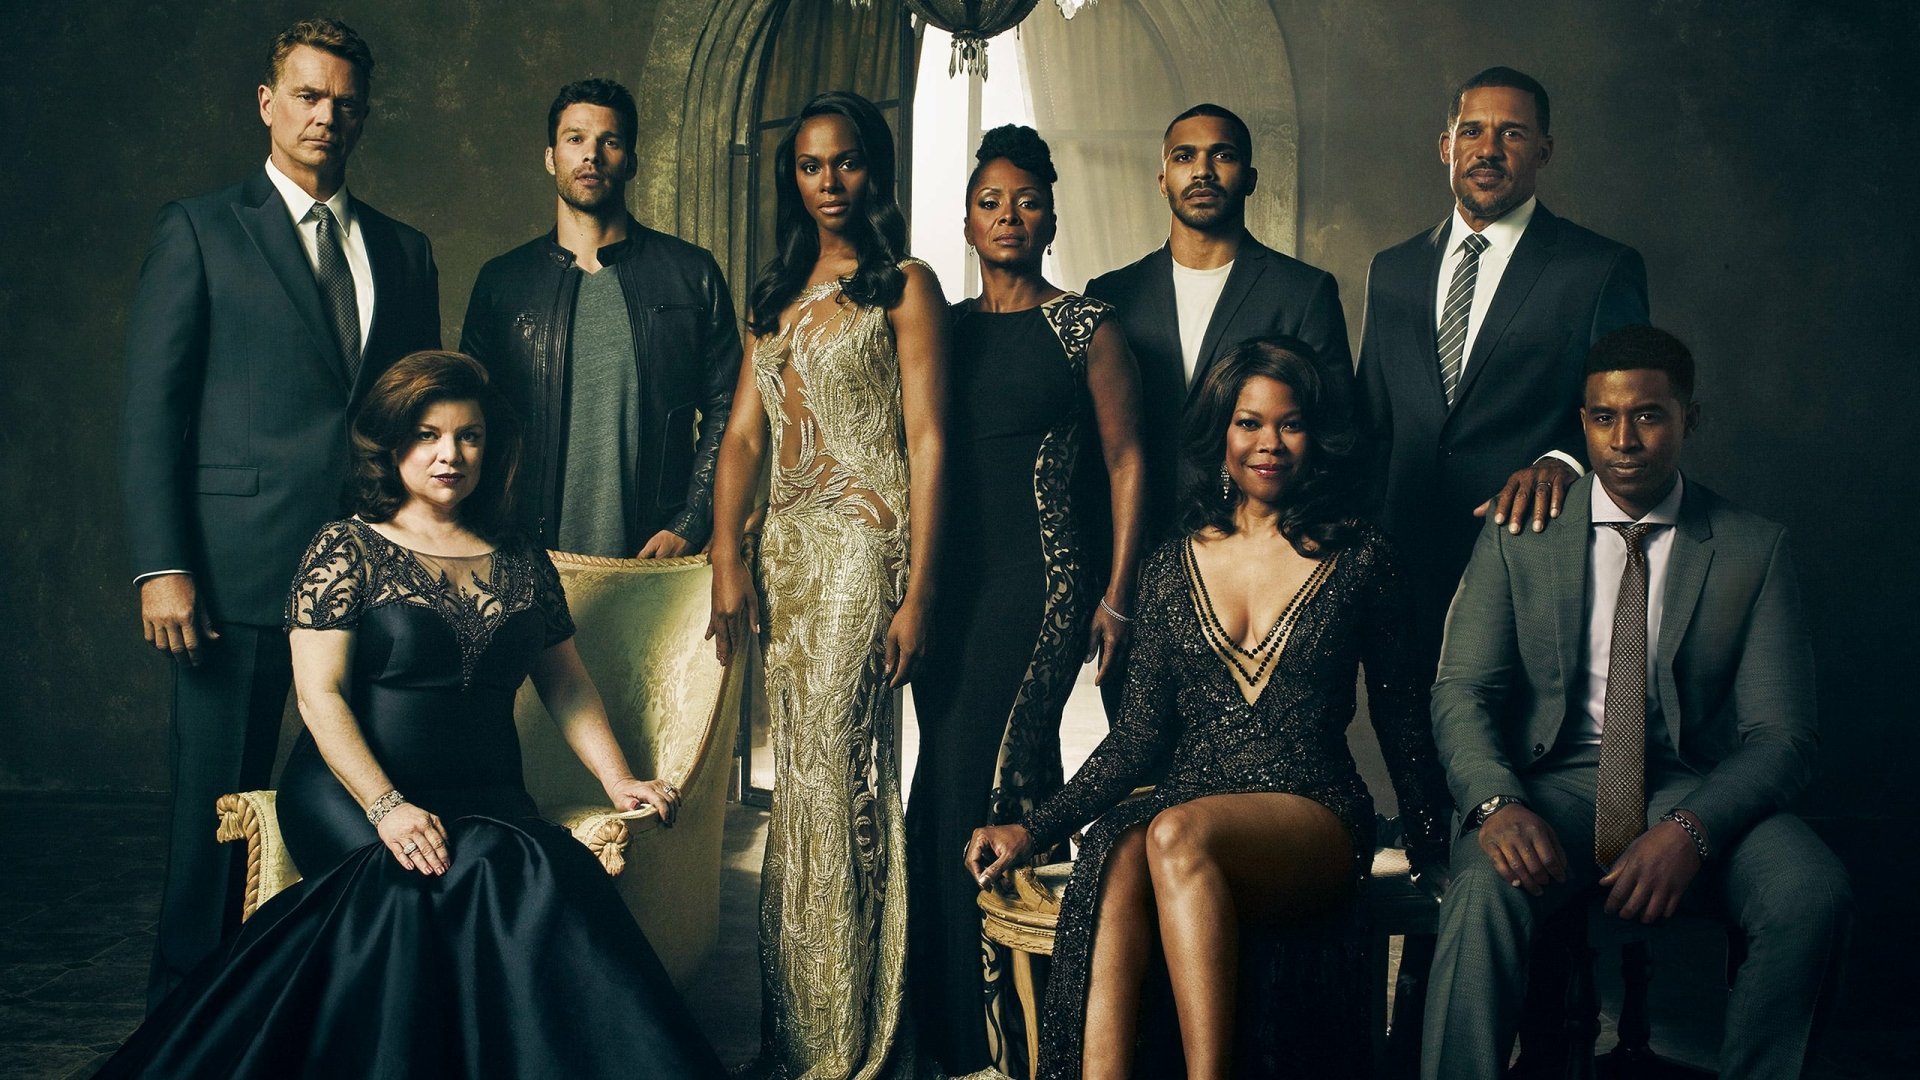 The Haves And The Have Nots Wallpapers